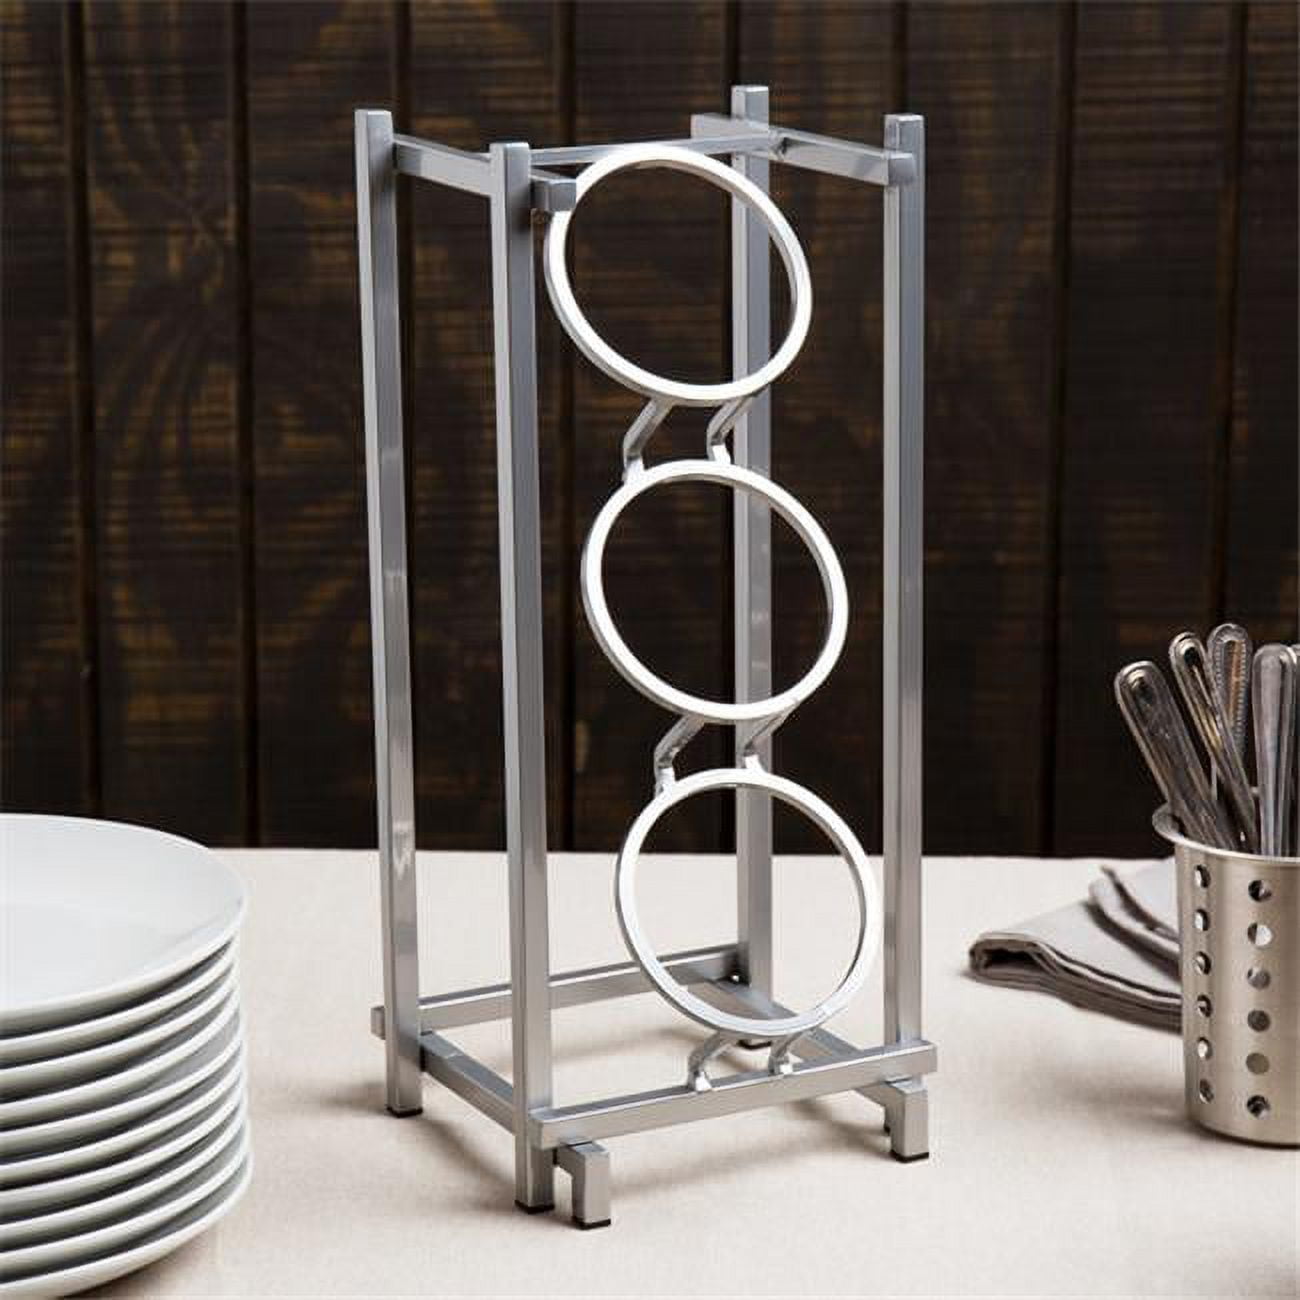 1134-74 One By One 3 Compartment Metal Silverware Holder, Silver - 7.5 X 6.5 X 17.375 In.